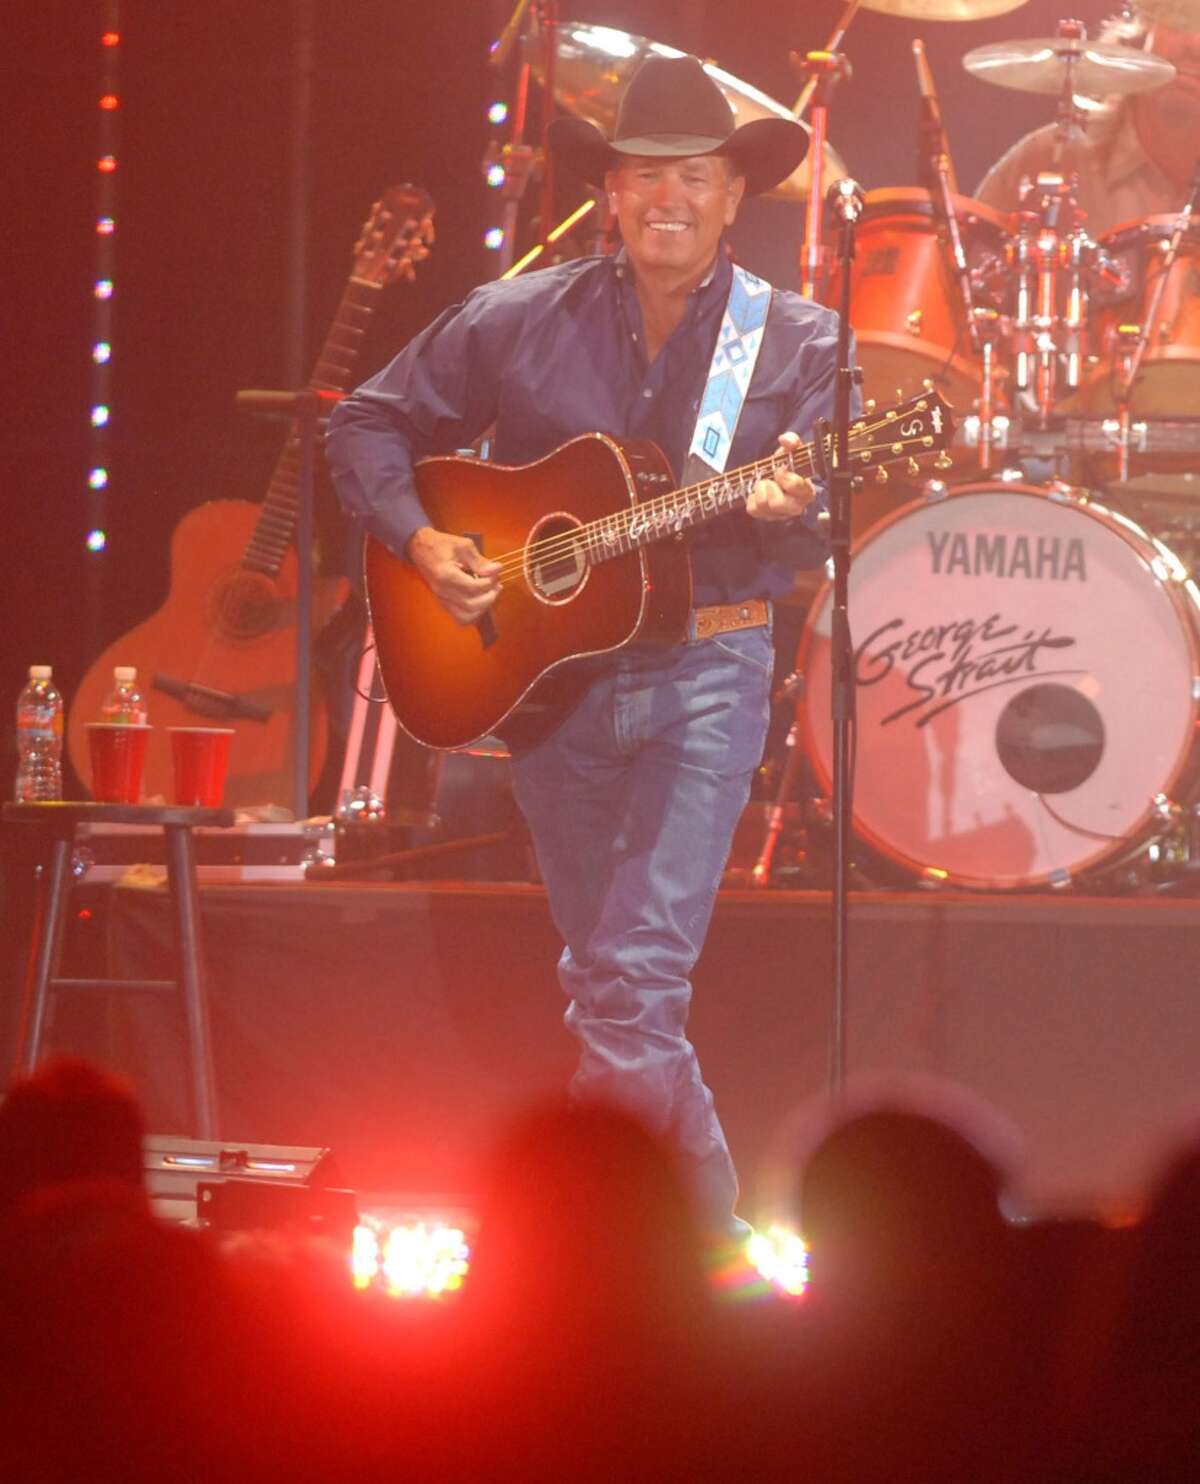 Fake George Strait tickets being sold for final concert